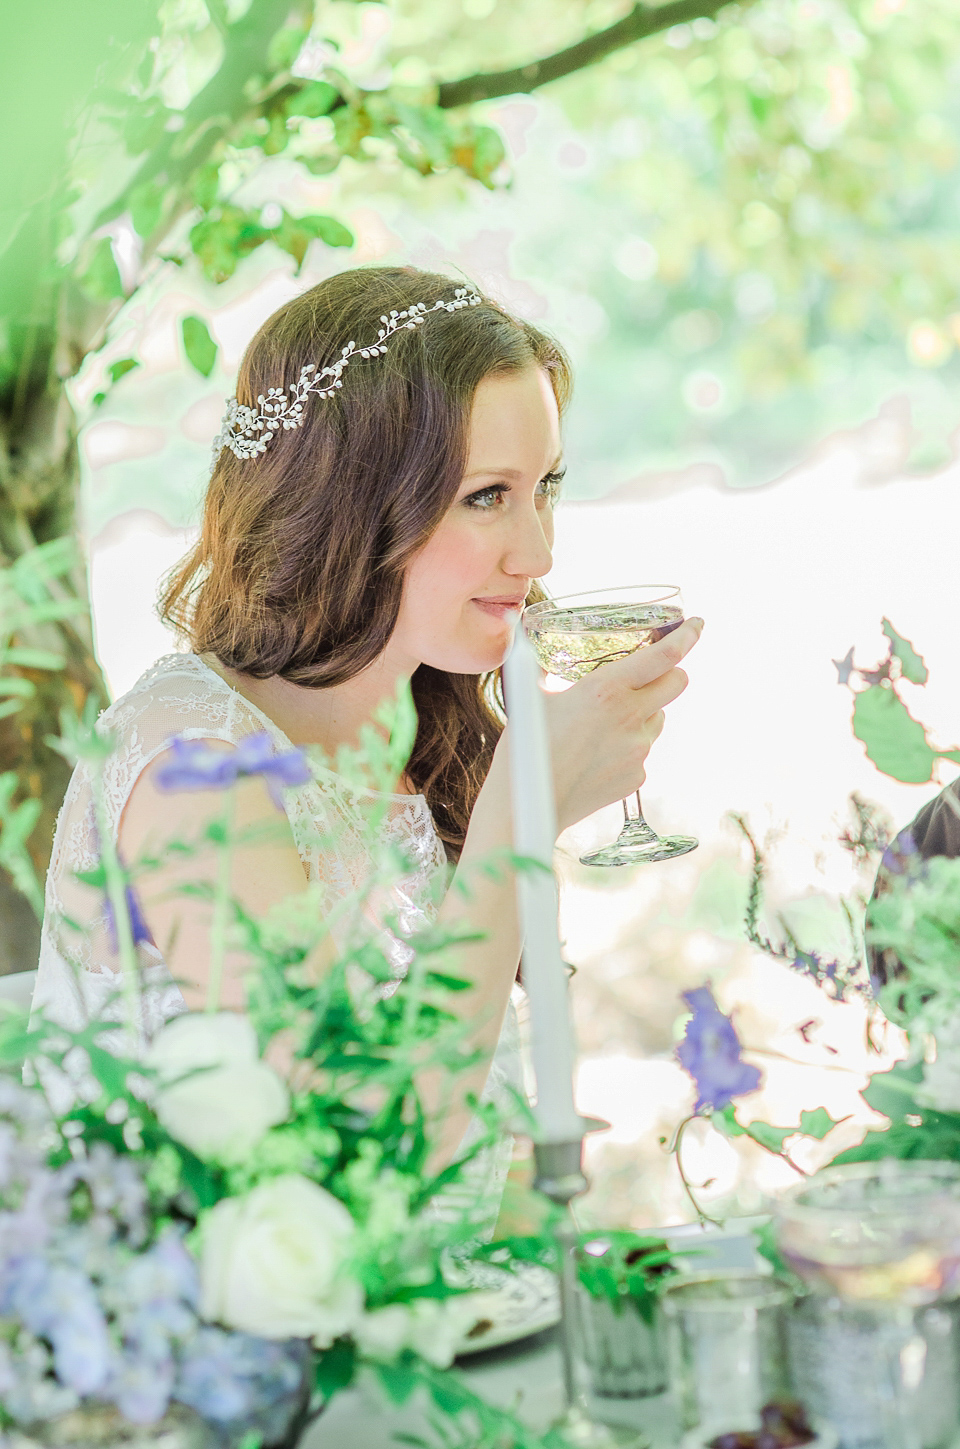 English literature inspired, romantic and elegant bridal style. Photography by Anaïs Stoelen.